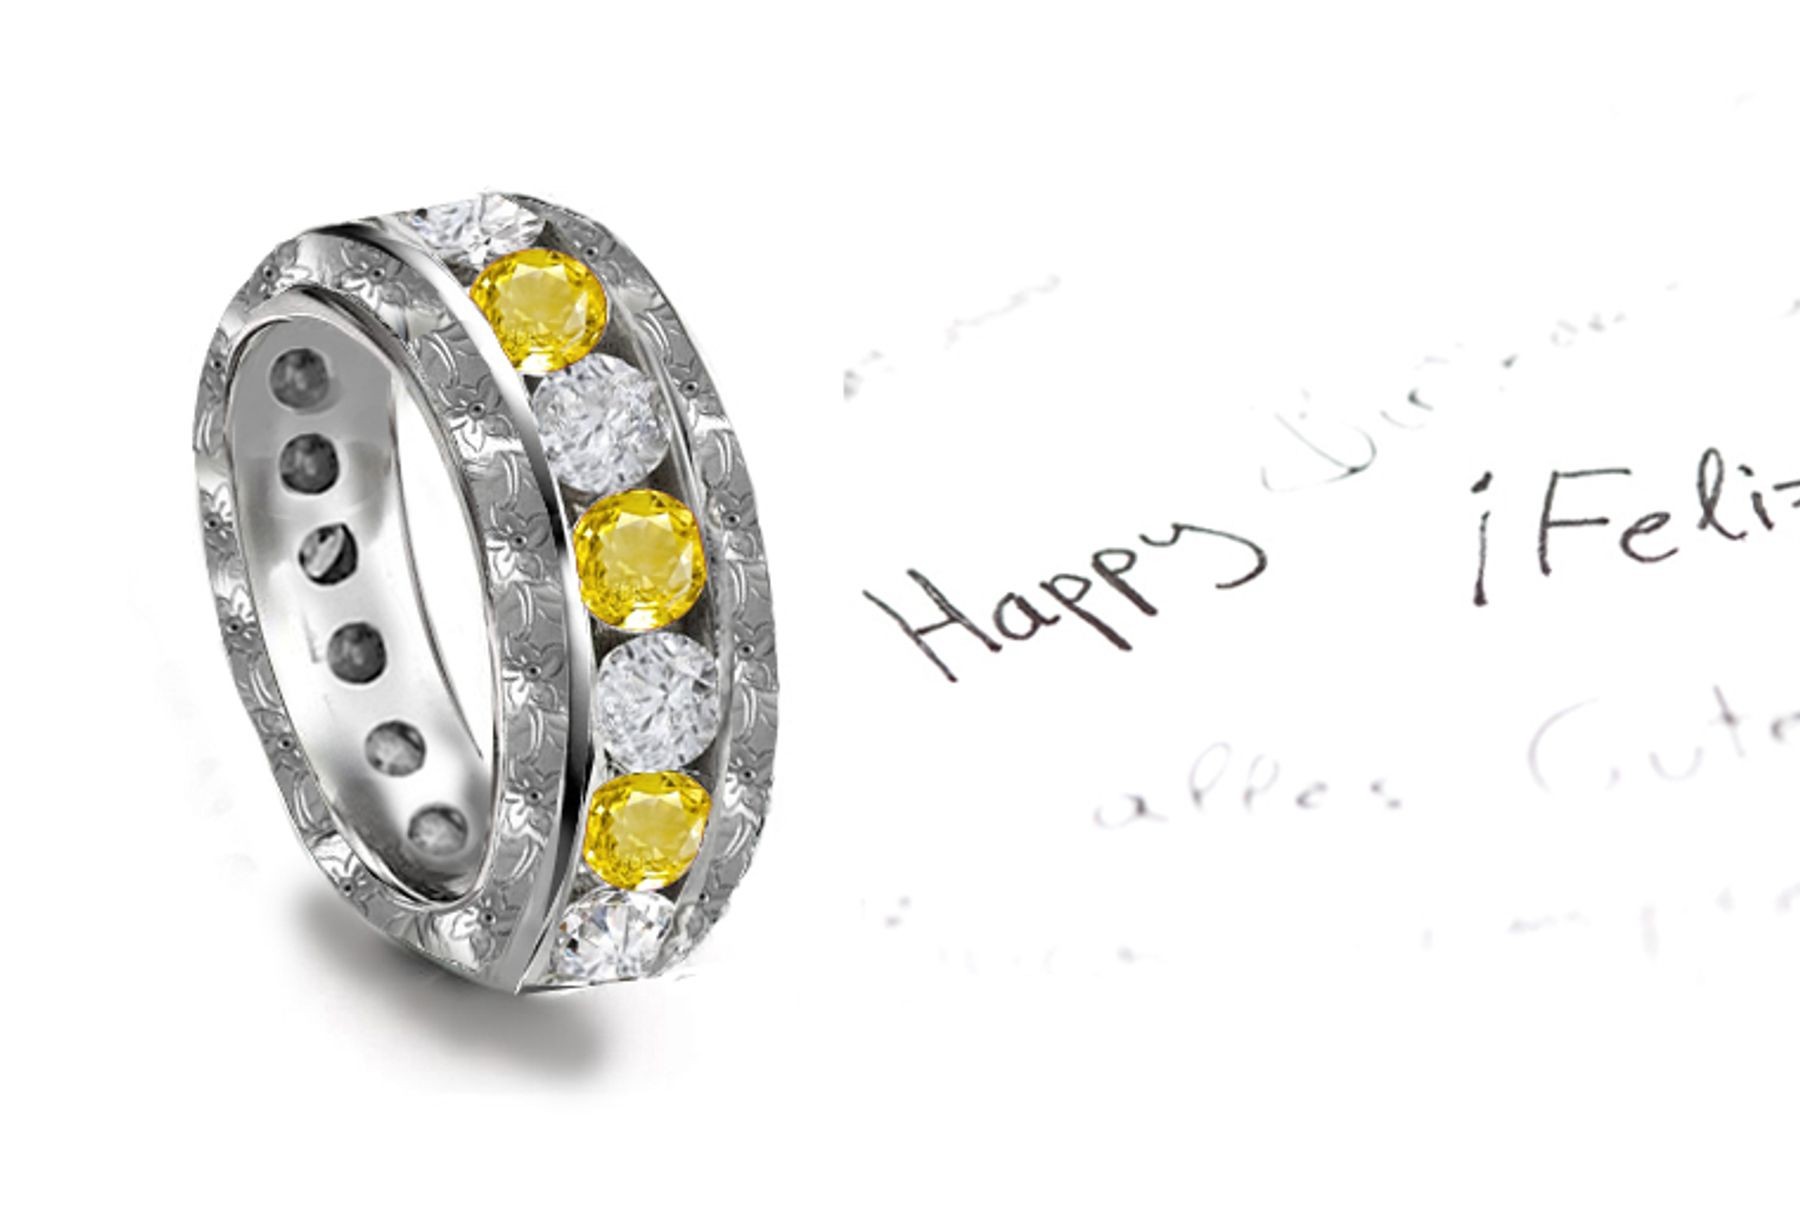 Glittering Diamond Ring Shows Spectral Radiance in Bright & Diffused Lights